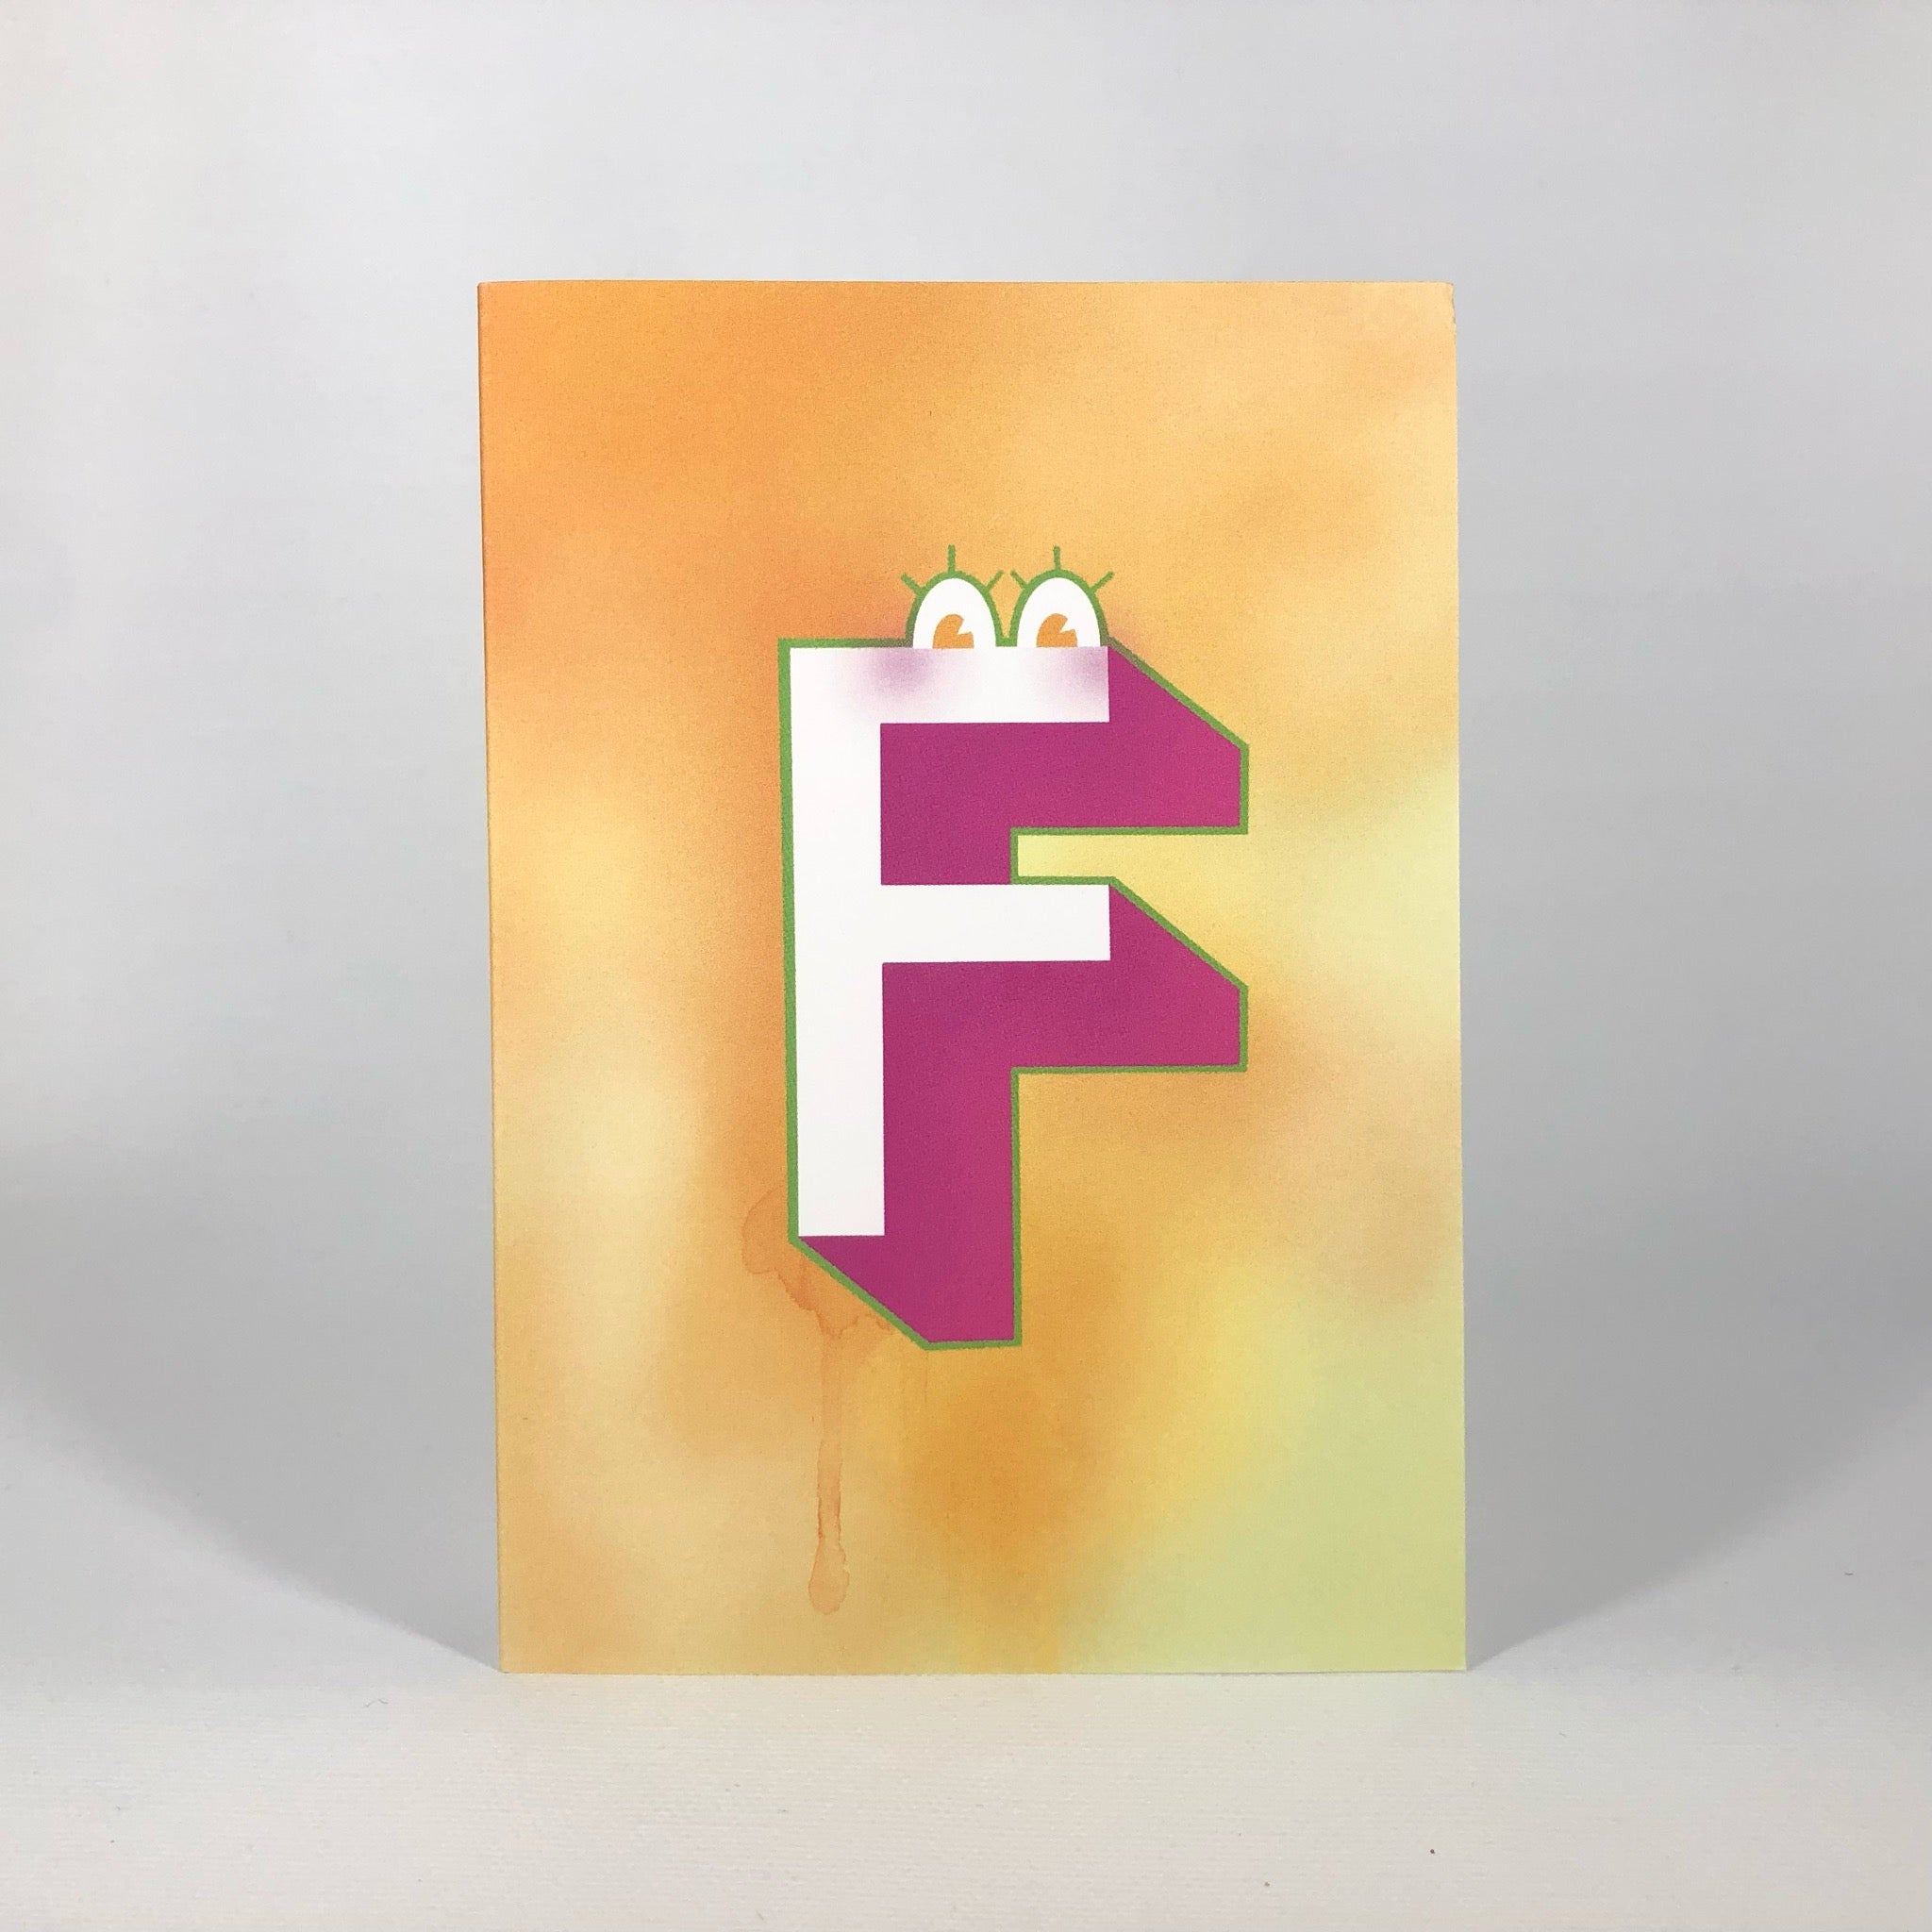 The Jolly Type F Greeting Card